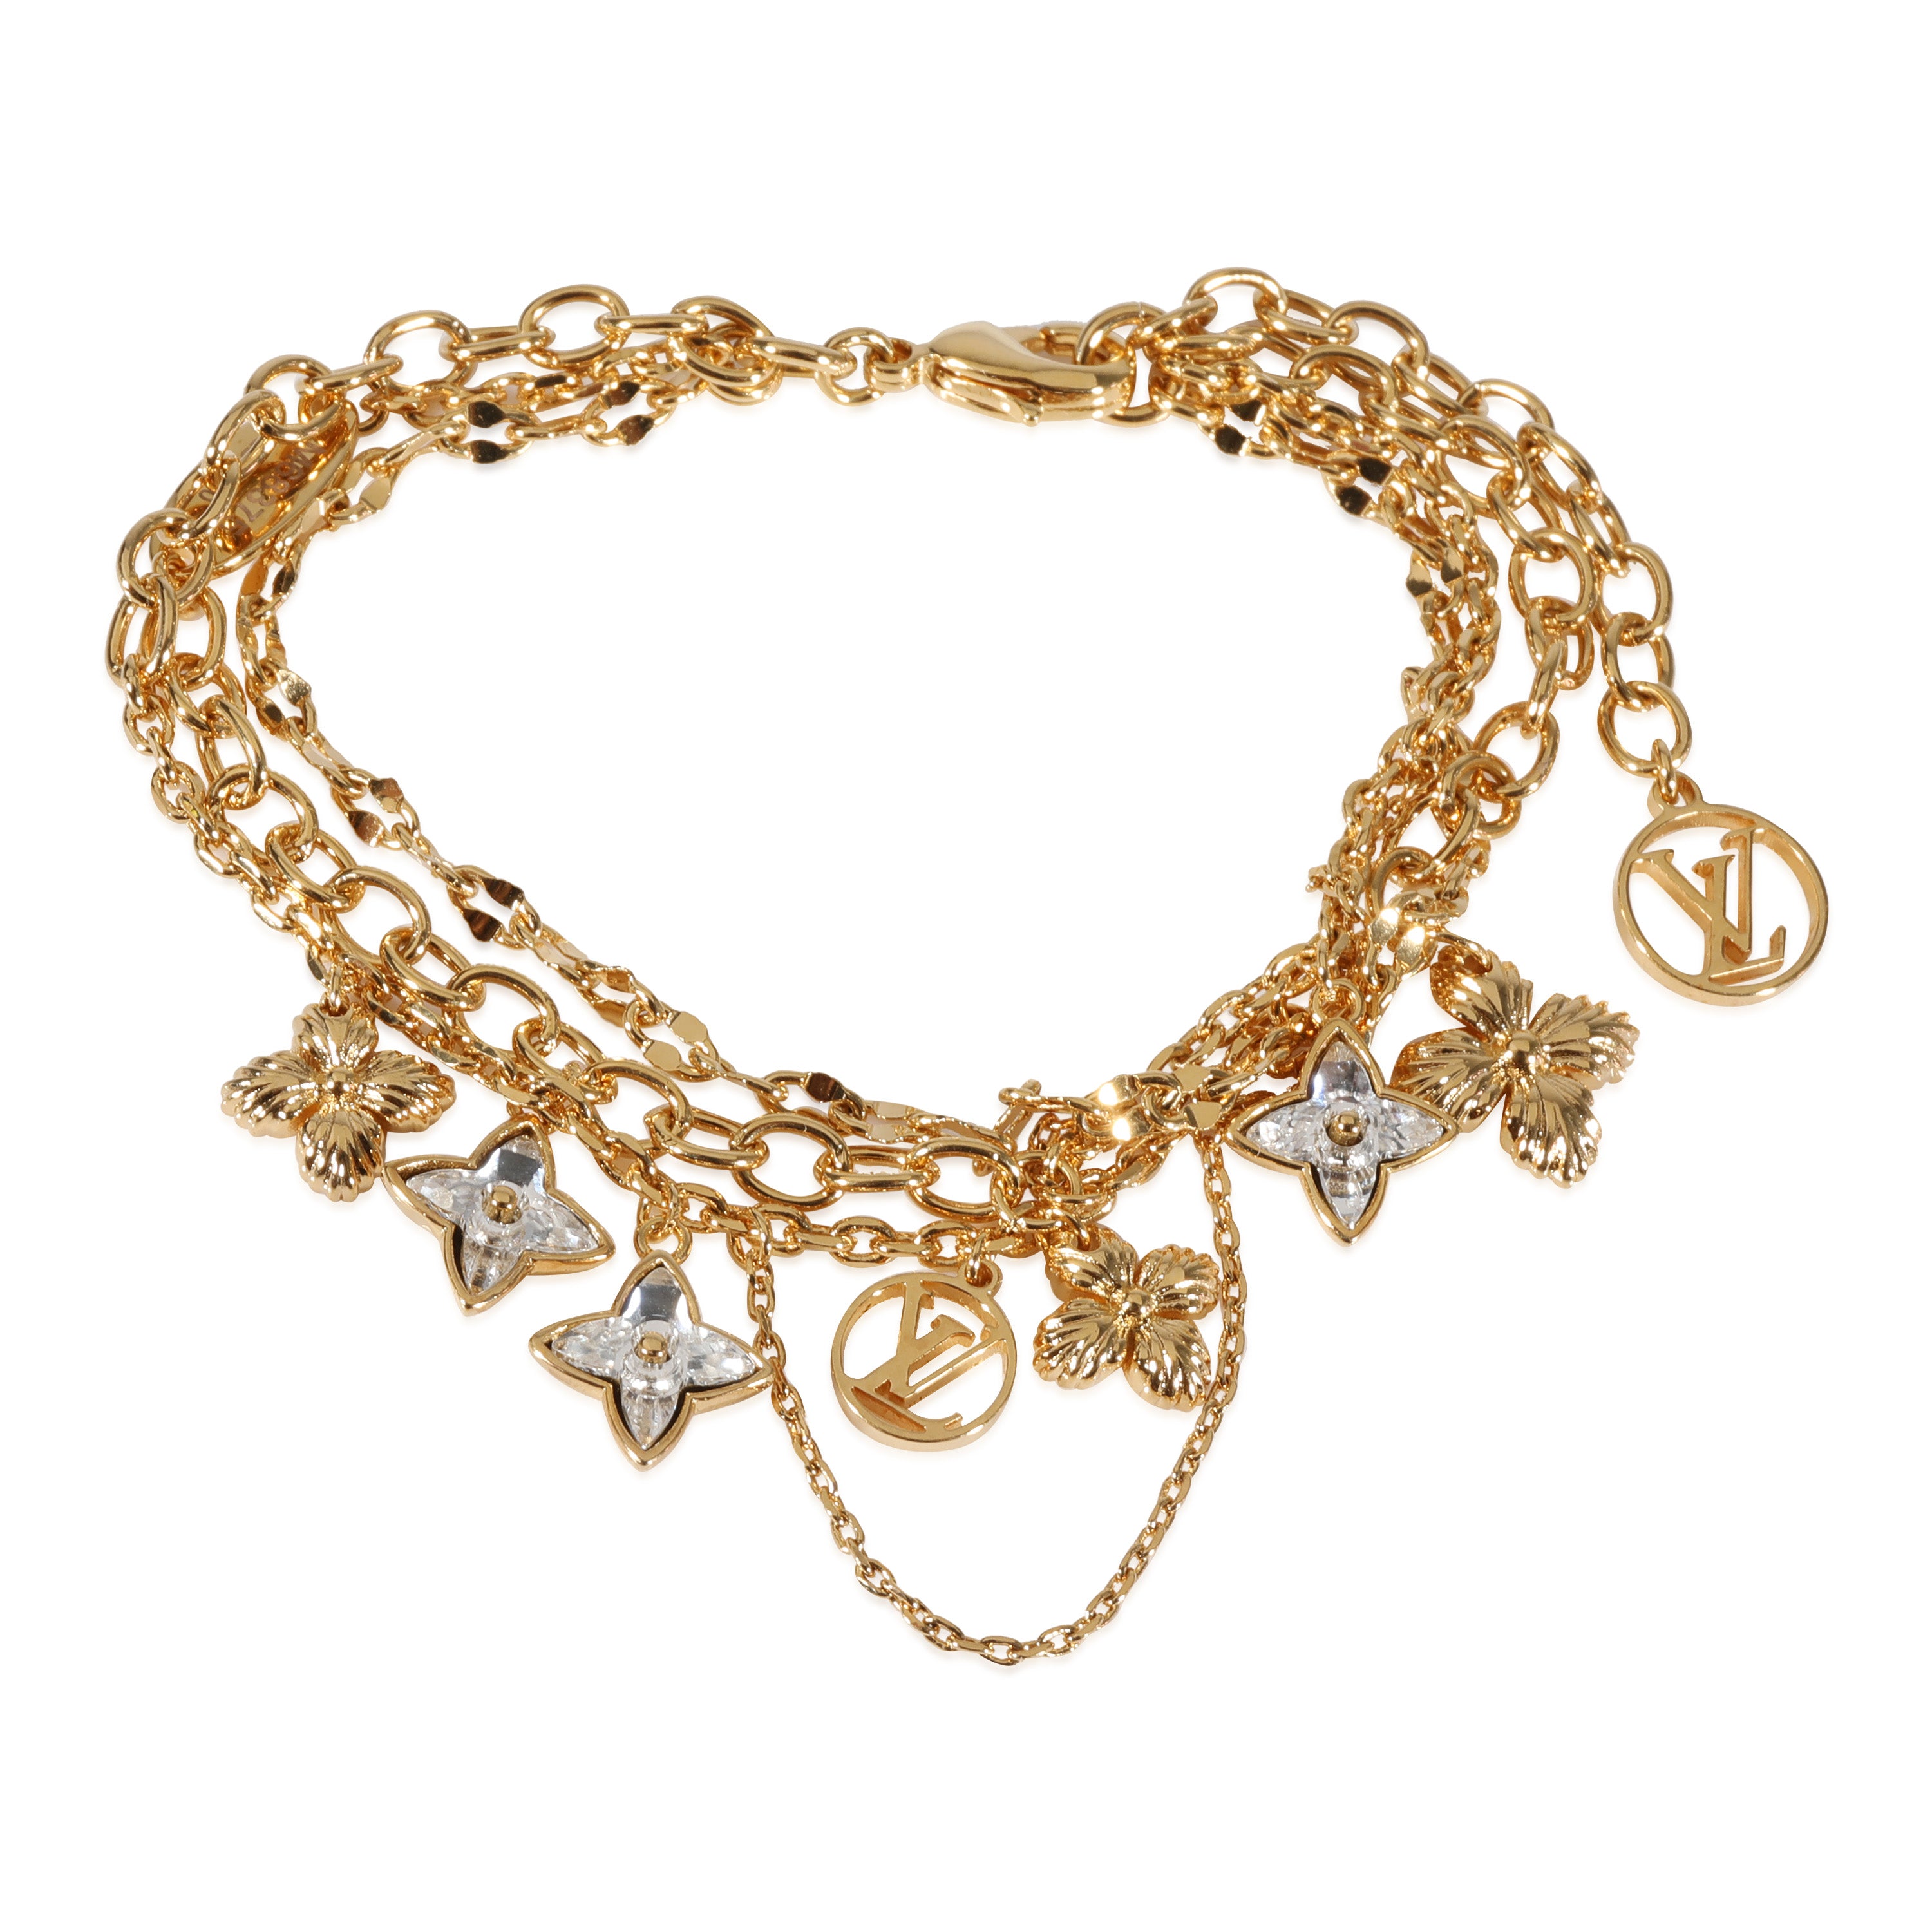 Louis Vuitton Blooming Supple Gold Plated Necklace, myGemma